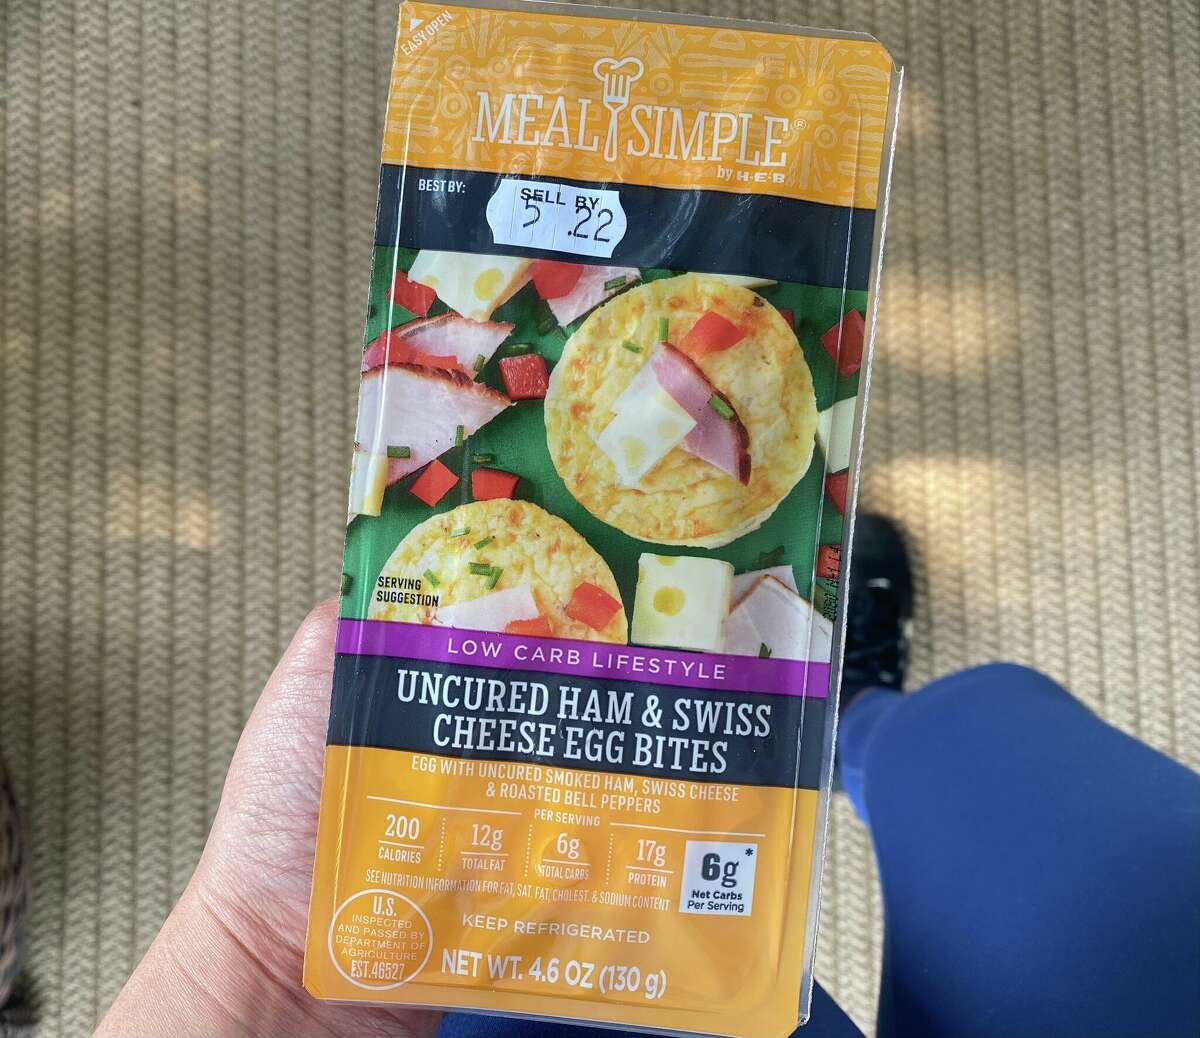 HEB now has Meal Simple breakfast options. 